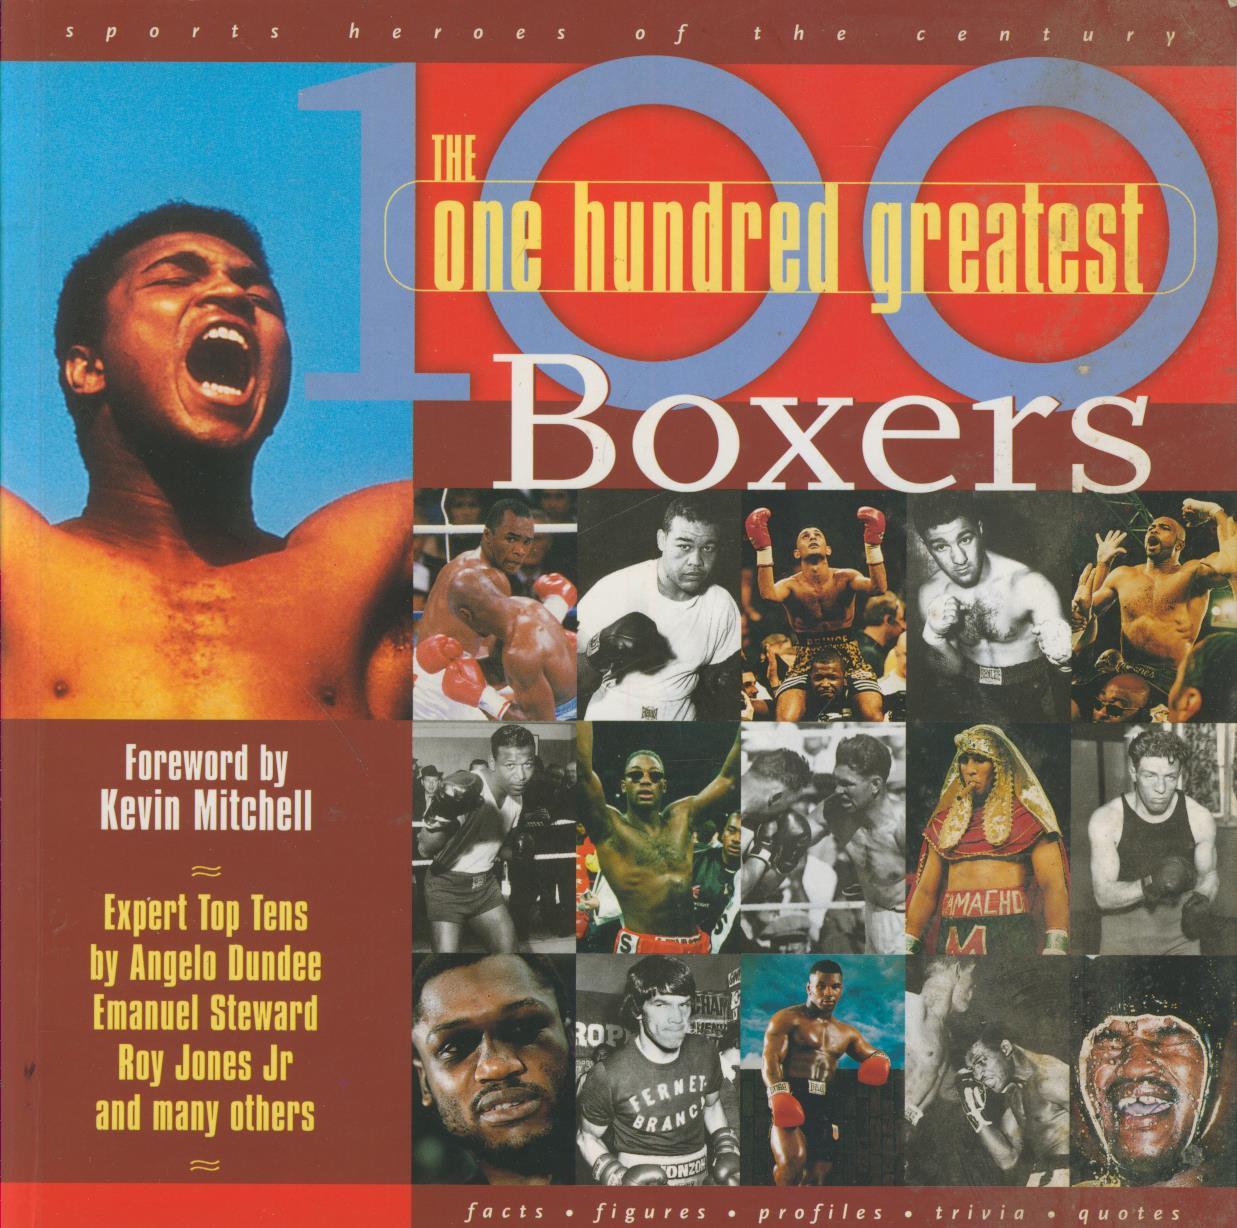 THE ONE HUNDRED GREATEST BOXERS - Boxing Reference: Sportspages.com